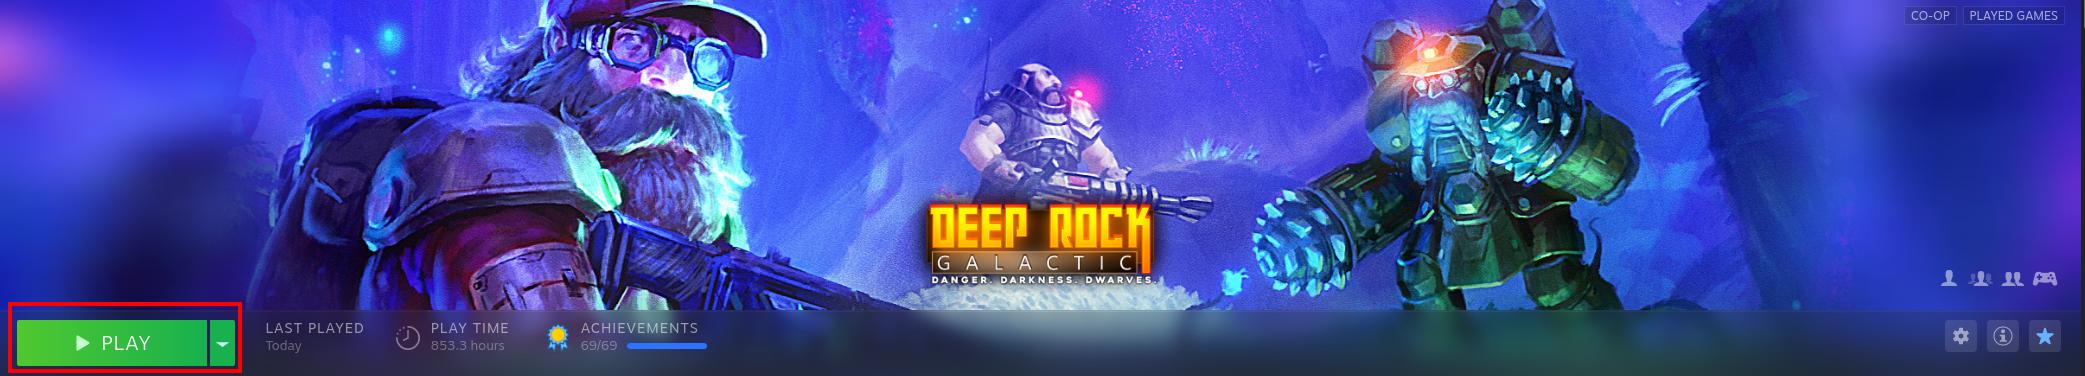 Deep Rock Galactic AMD User Guide - Difference Between FSR and DLSS Explained!